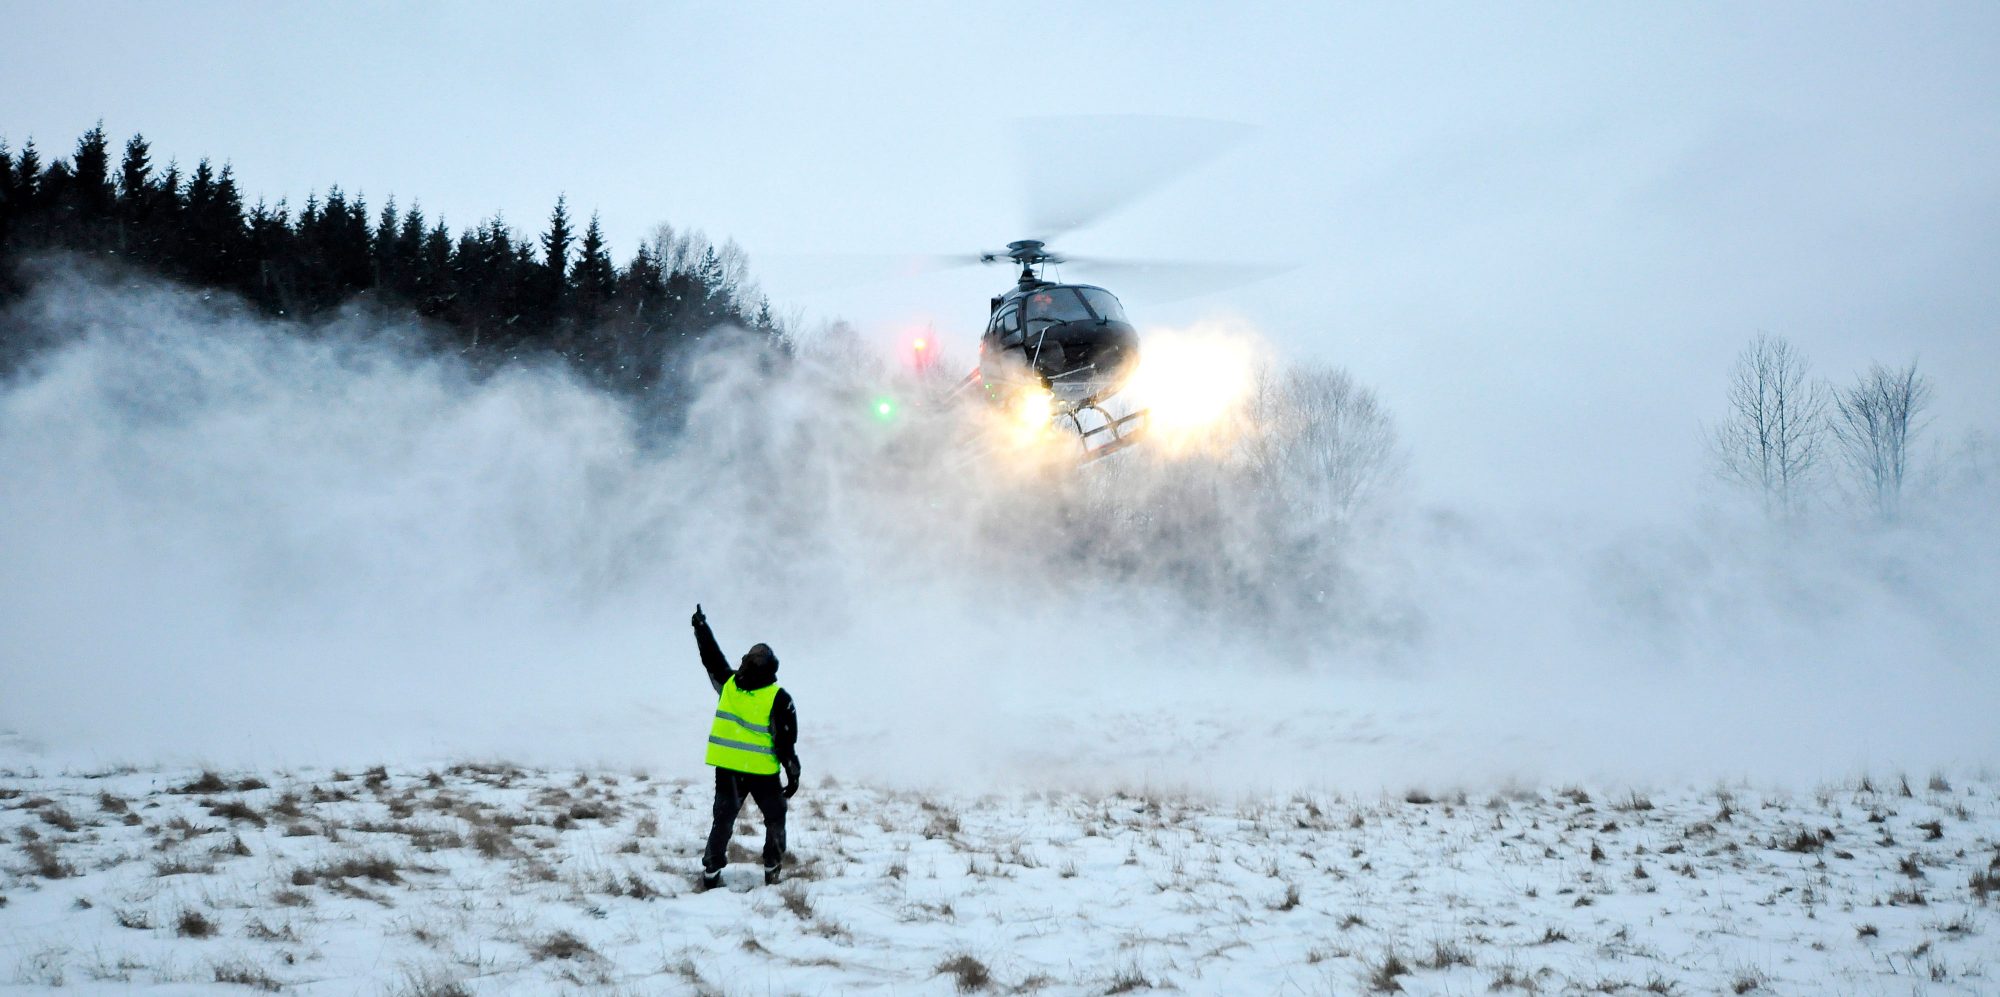 Advice for helicopter pilots in harsh winter conditions